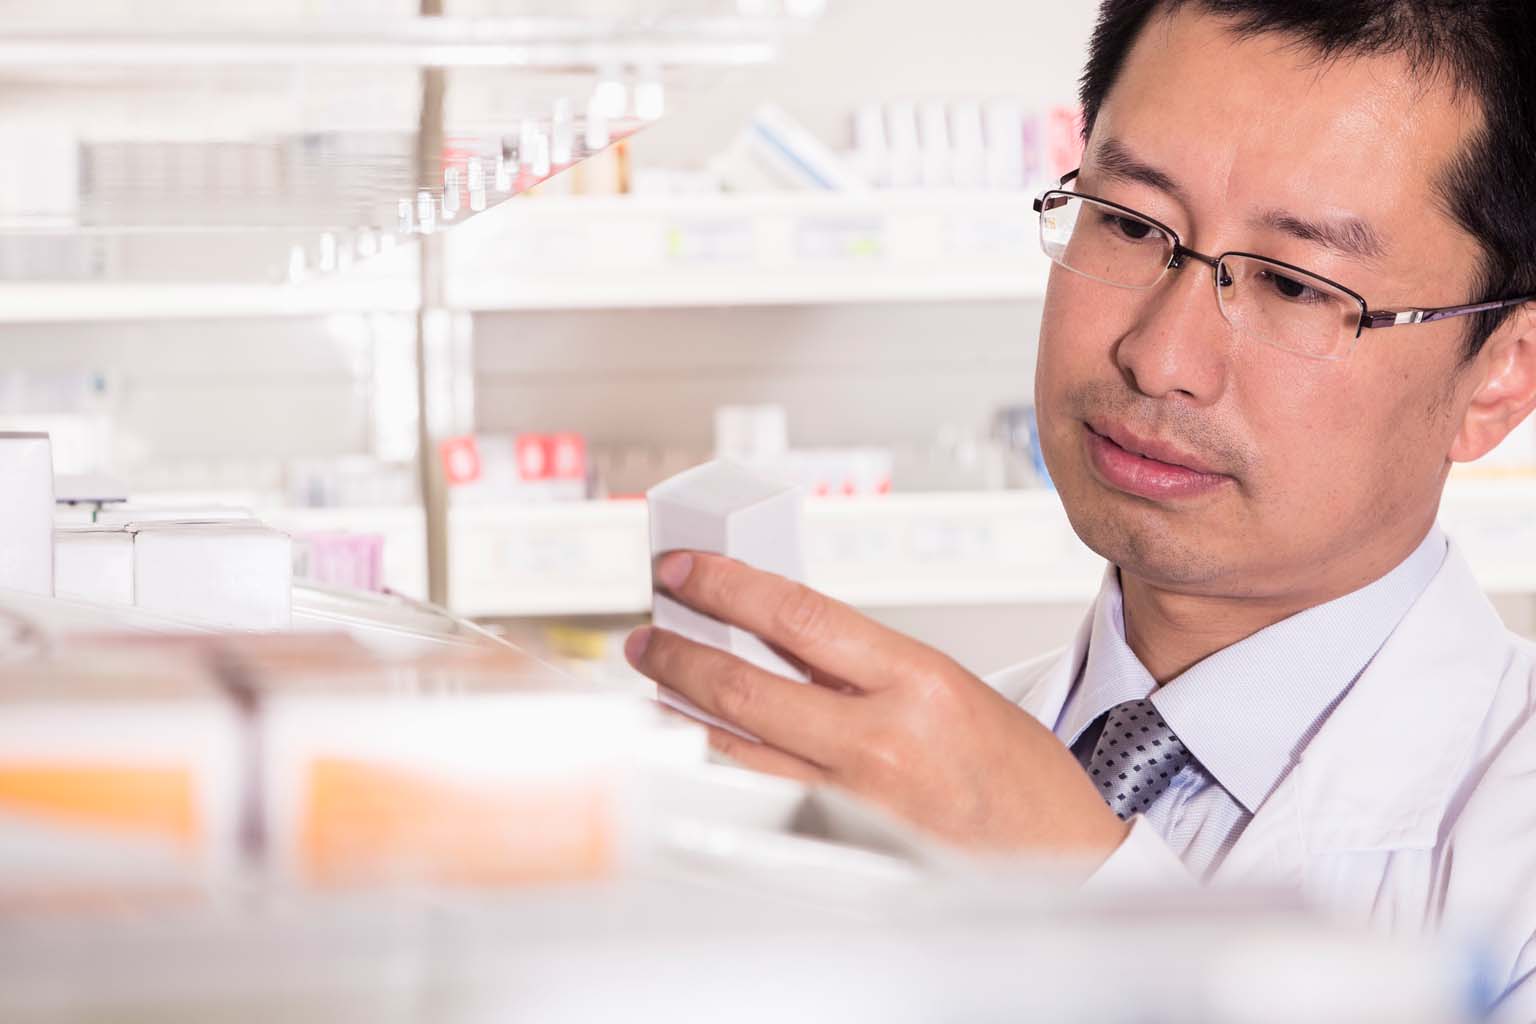 Six common pharmacist challenges that can be solved by a single drug information resource